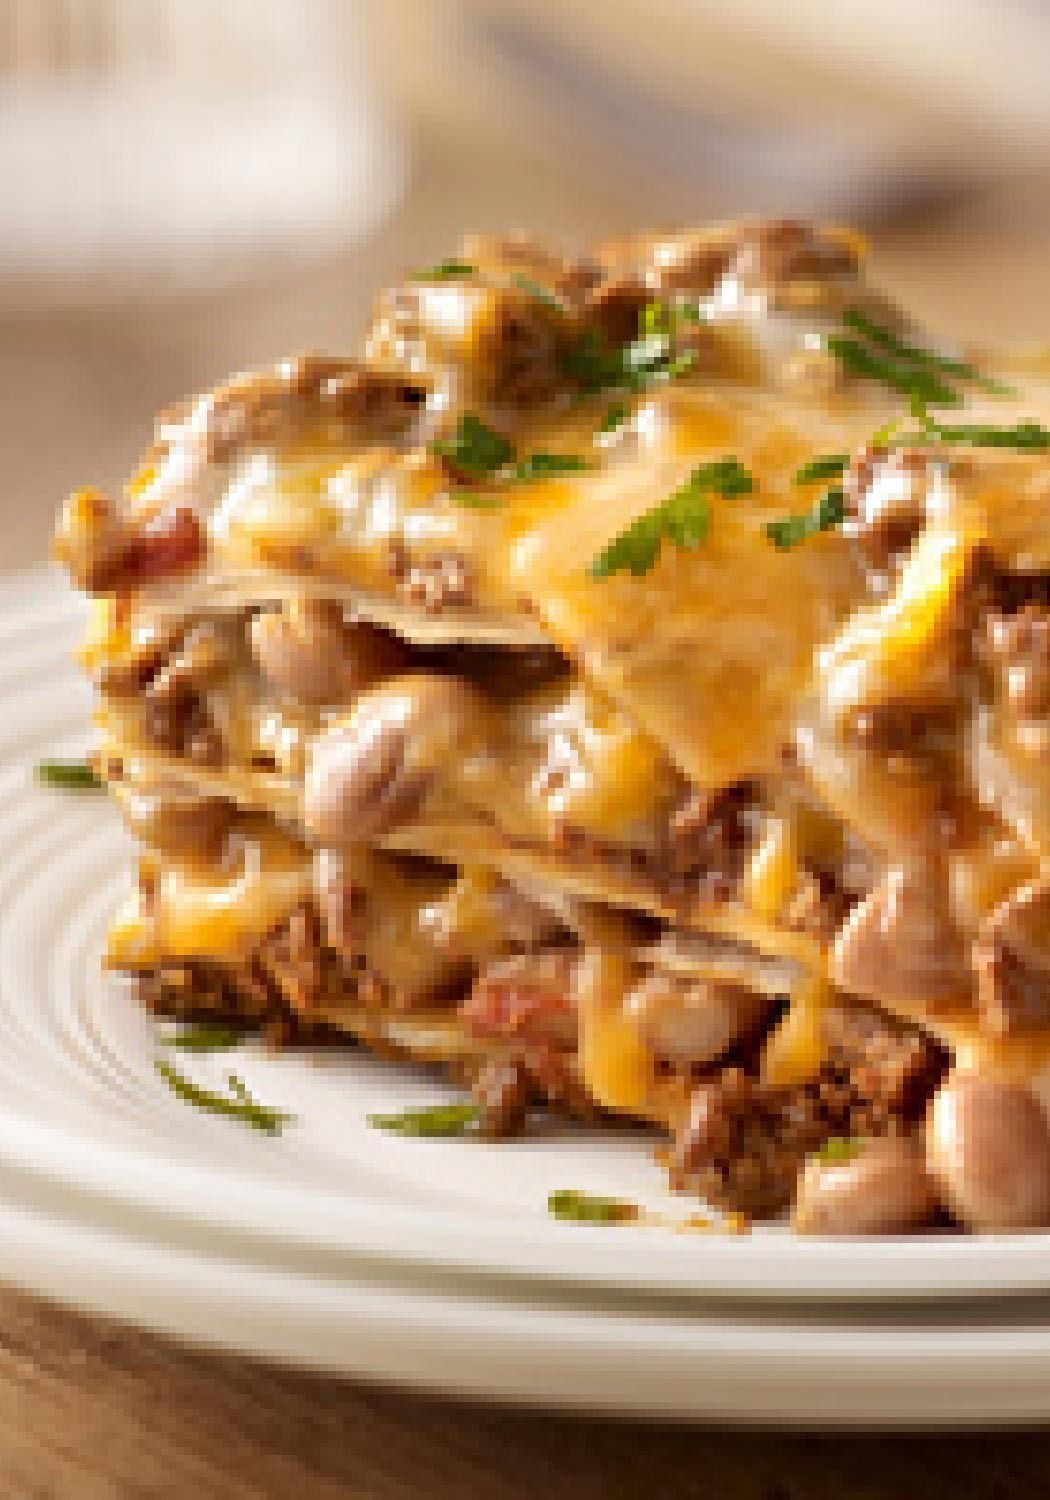 Taste Of Home Mexican Lasagna
 Our Favorite Mexican Style Lasagna — Create a little